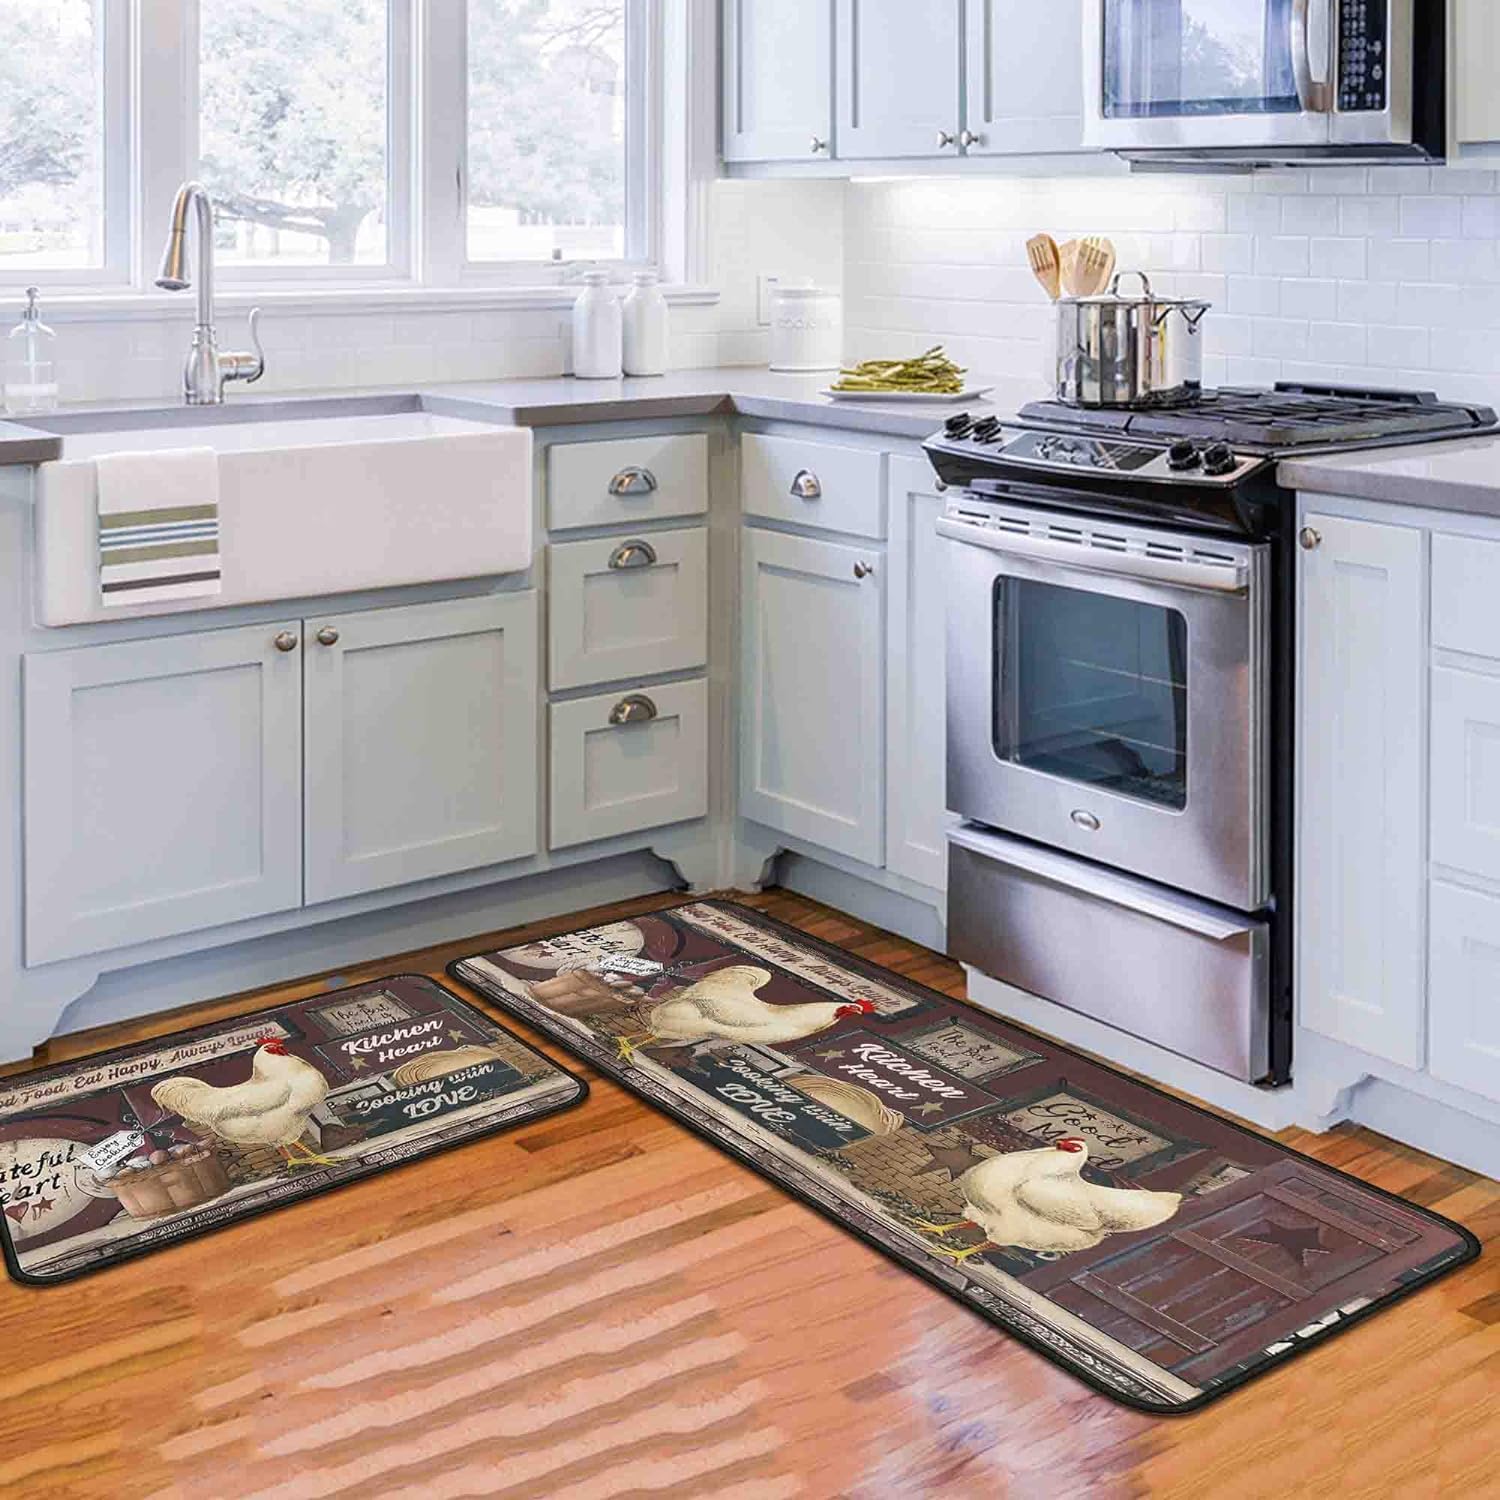 flippana Kitchen Rugs Farmhouse Style for Floor, Rooster Kitchen Rug, Non-Slip Backing Kitchen Mat Set of 2 Washable Kitchen Rug Sets with Runner for Home Kitchen 17x47.2+17x30